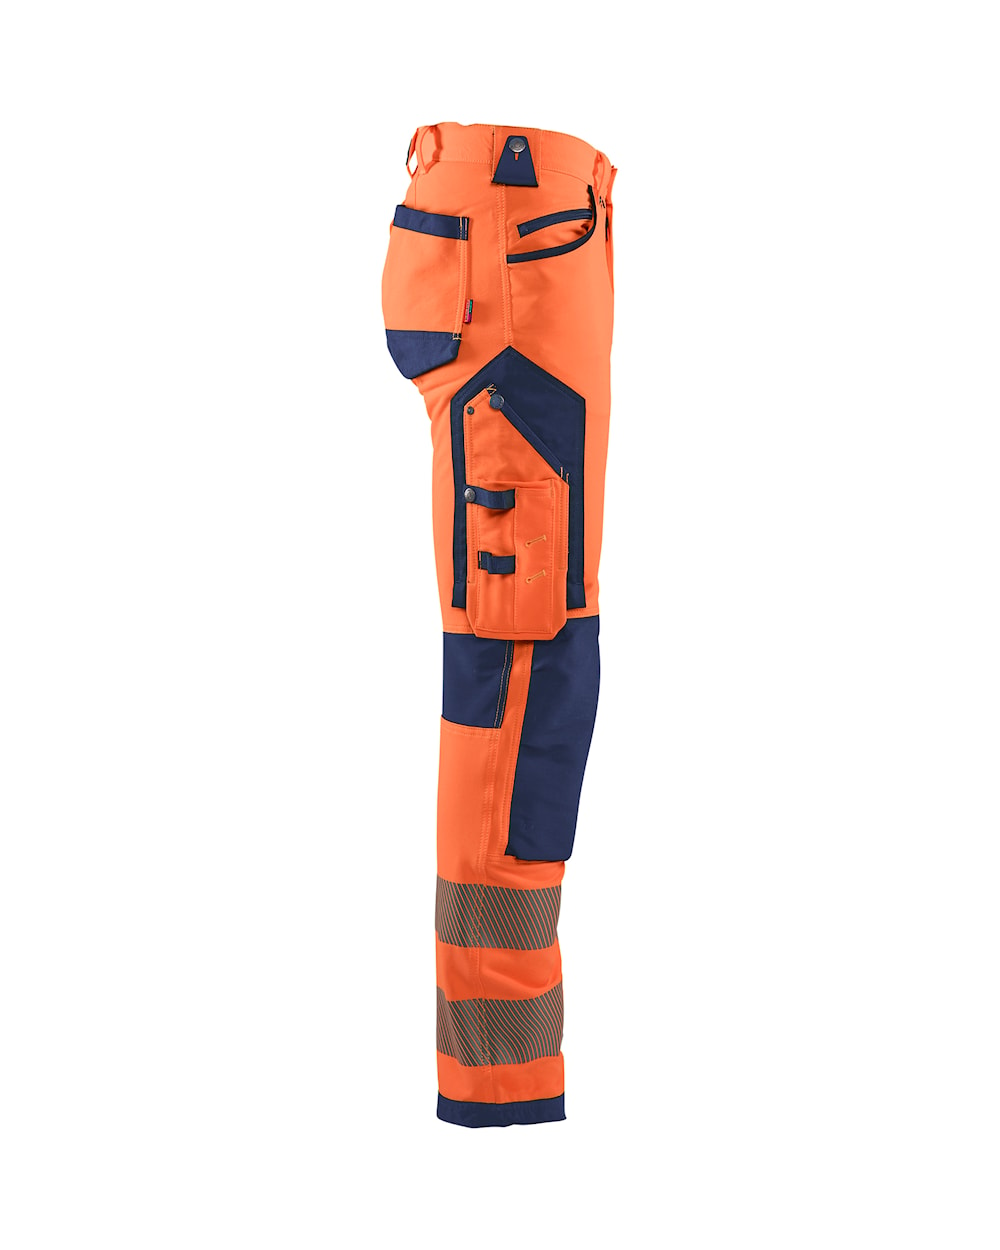 Blaklader Hi-Vis Trousers, 4-Way Stretch without Nail Pockets 1197